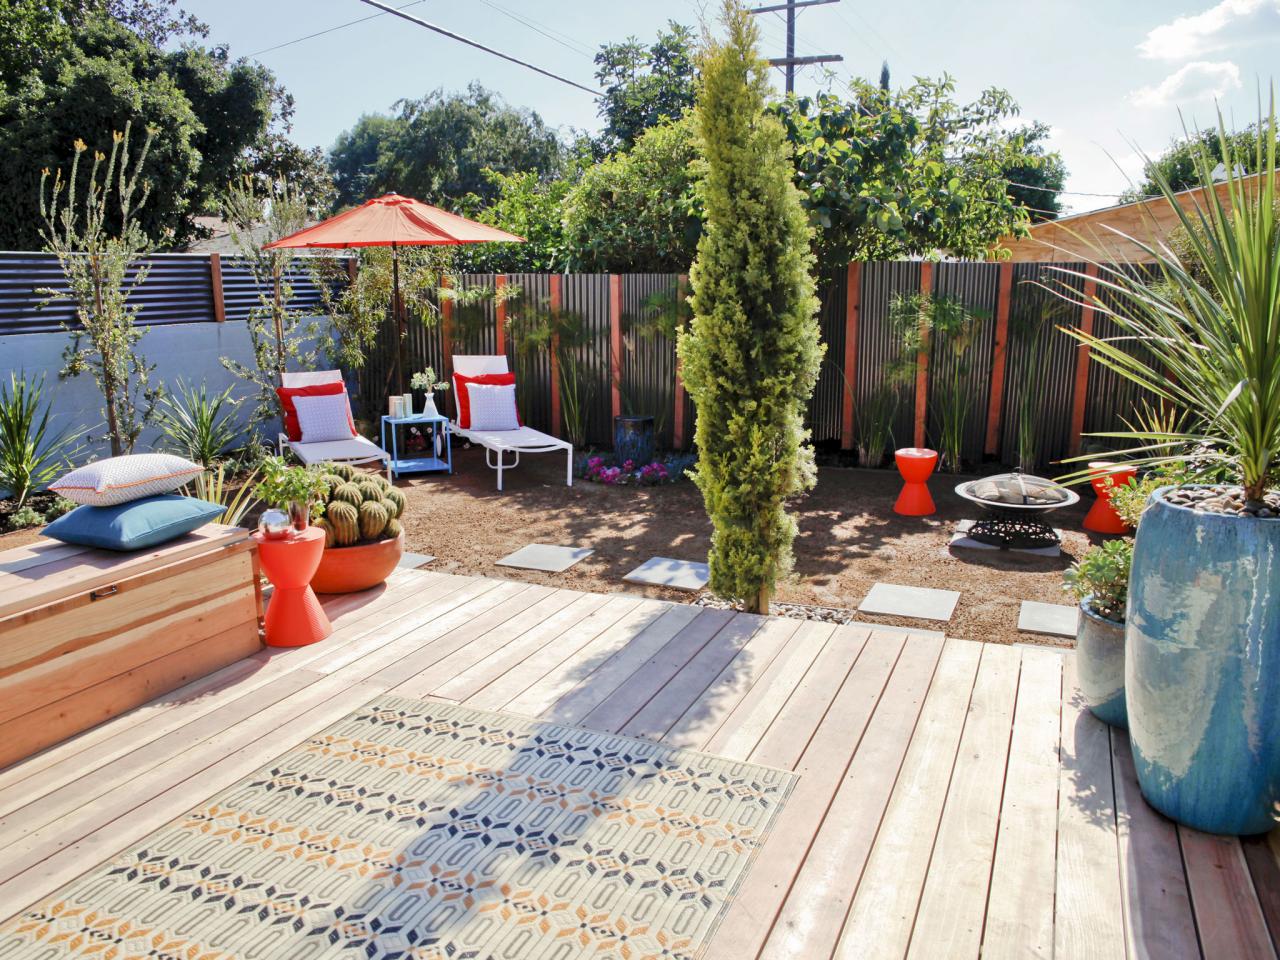 27 Ways To Add Privacy To Your Backyard HGTVs Decorating Design